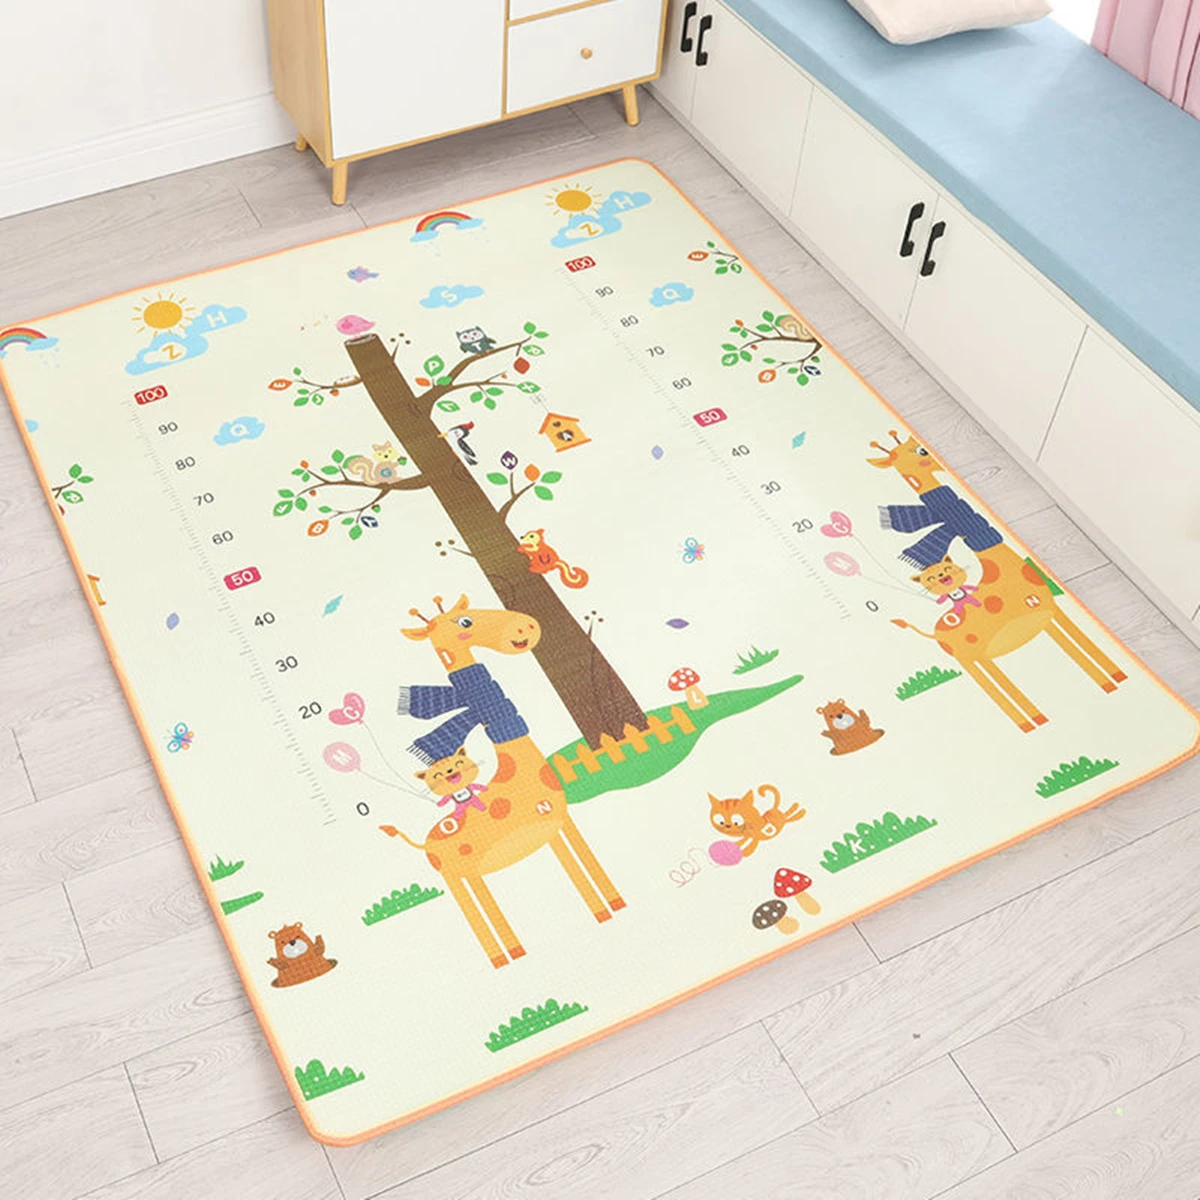 foldable playmat xpe foam crawling carpet baby play mat blanket children rug for kids educational toys soft activity game floor free global shipping